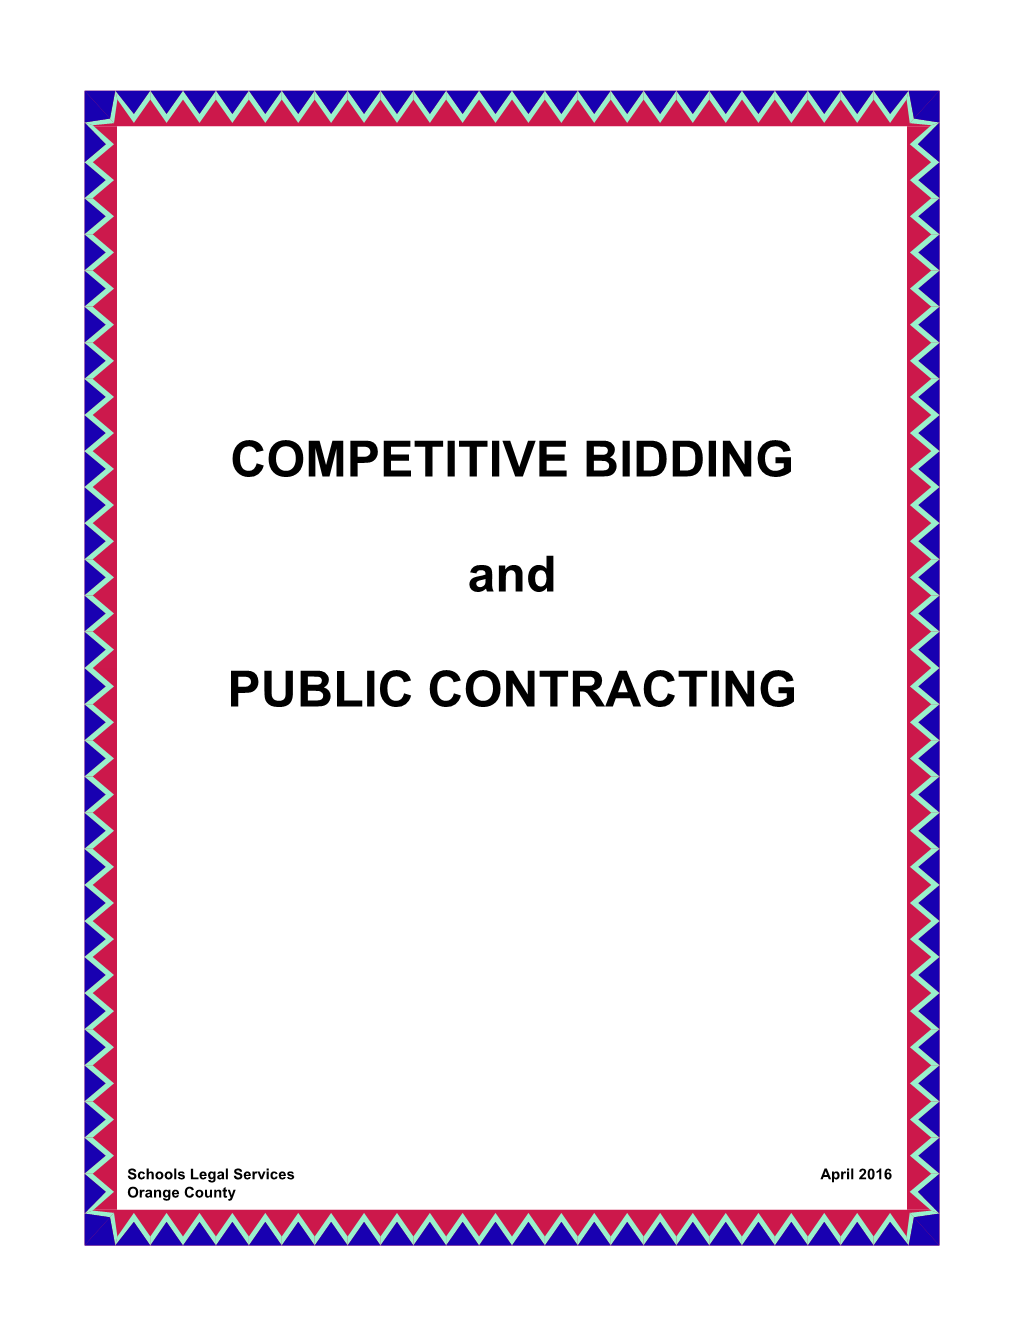 Competitive Bidding and Public Contracting